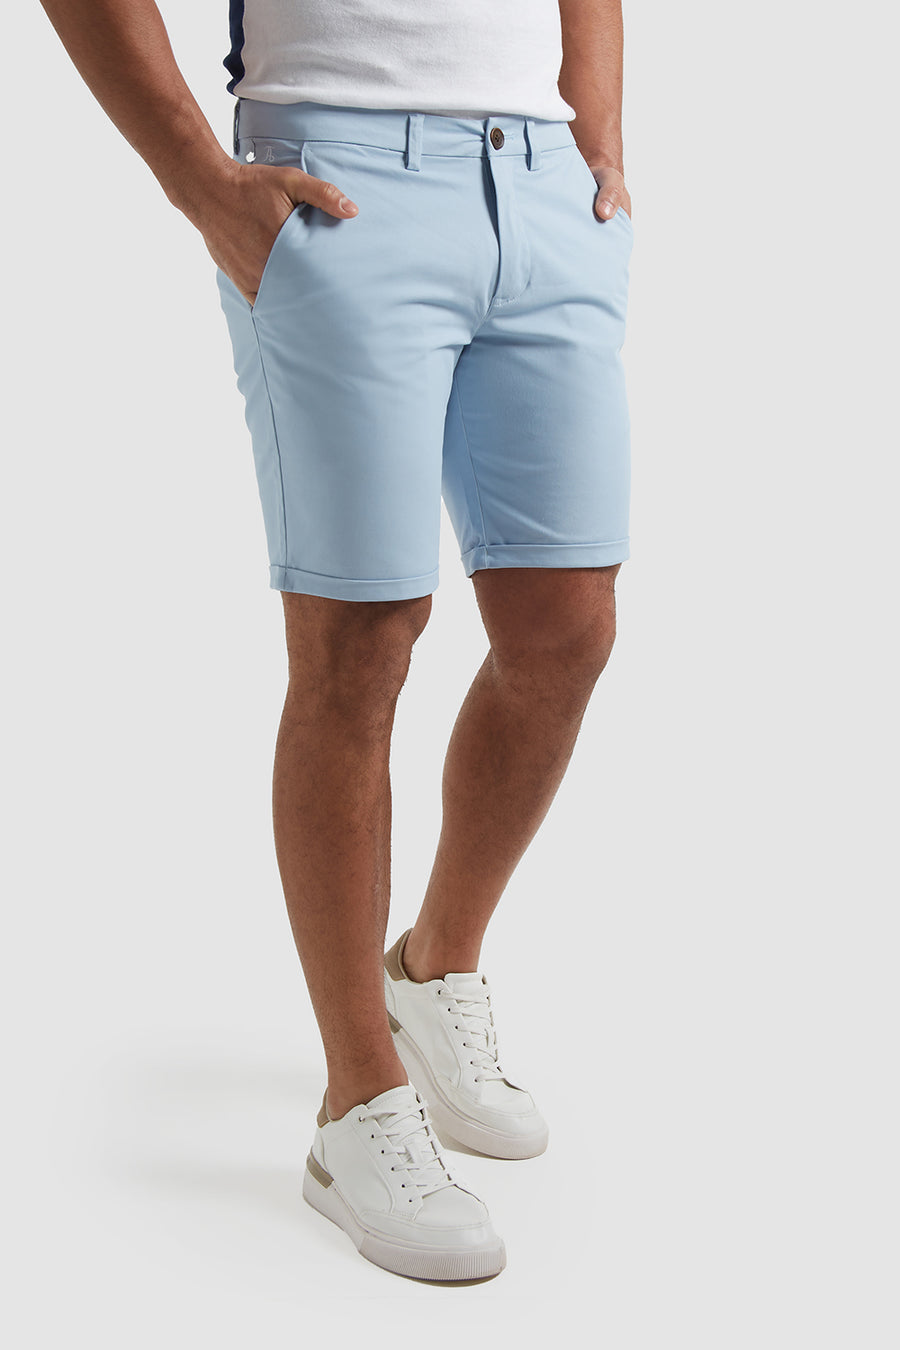 - Athletic - TAILORED Fit Navy USA Shorts in Chino ATHLETE